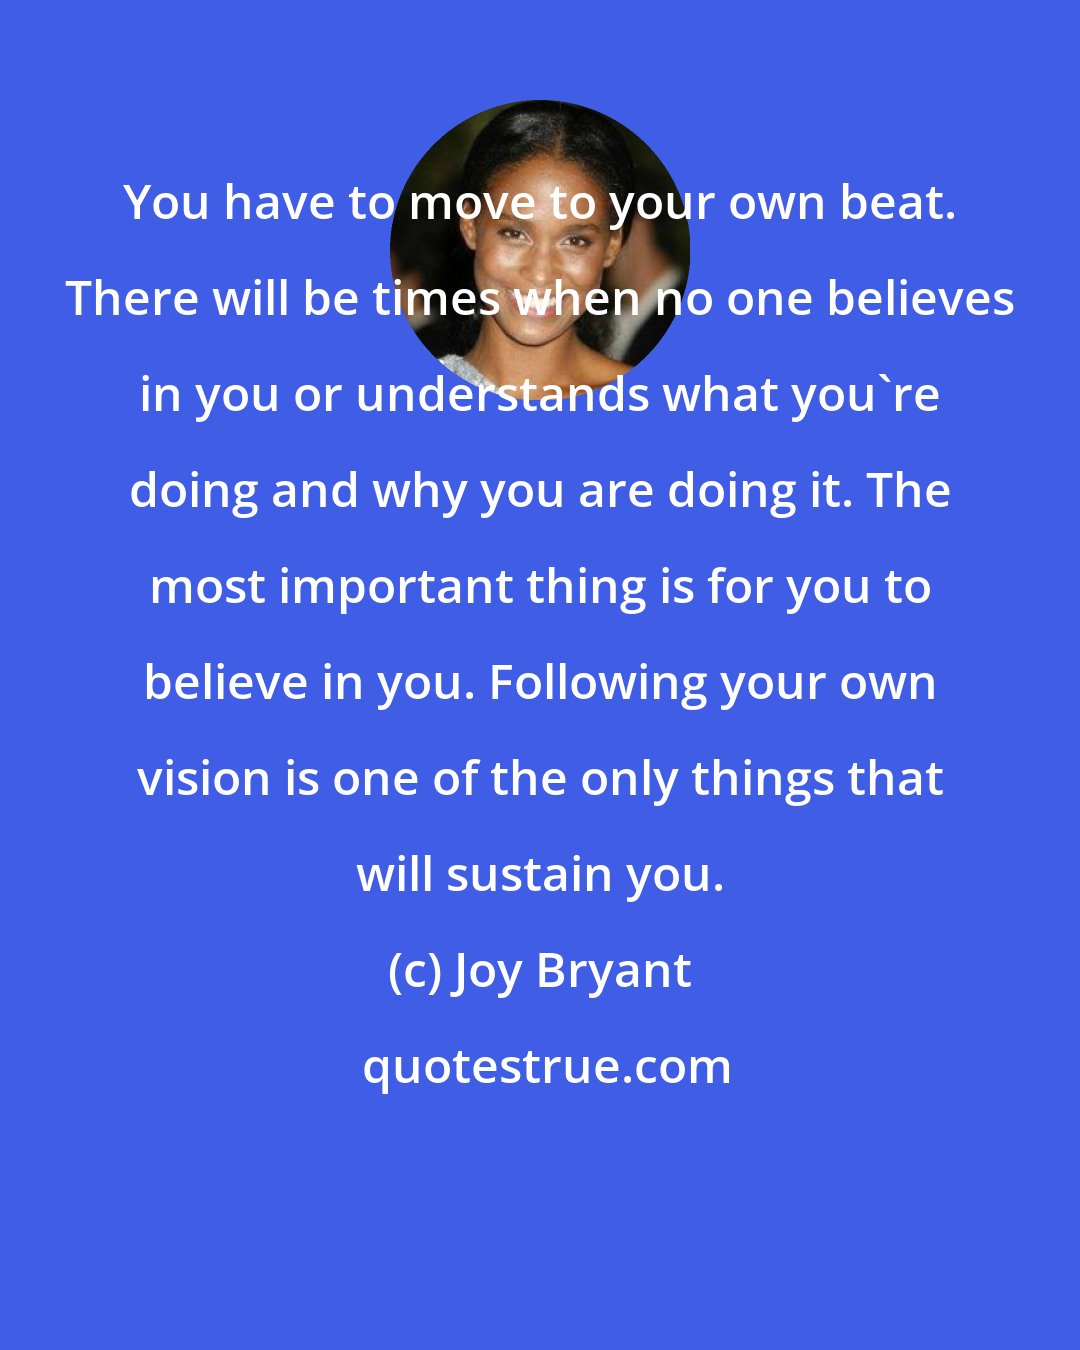 Joy Bryant: You have to move to your own beat. There will be times when no one believes in you or understands what you're doing and why you are doing it. The most important thing is for you to believe in you. Following your own vision is one of the only things that will sustain you.